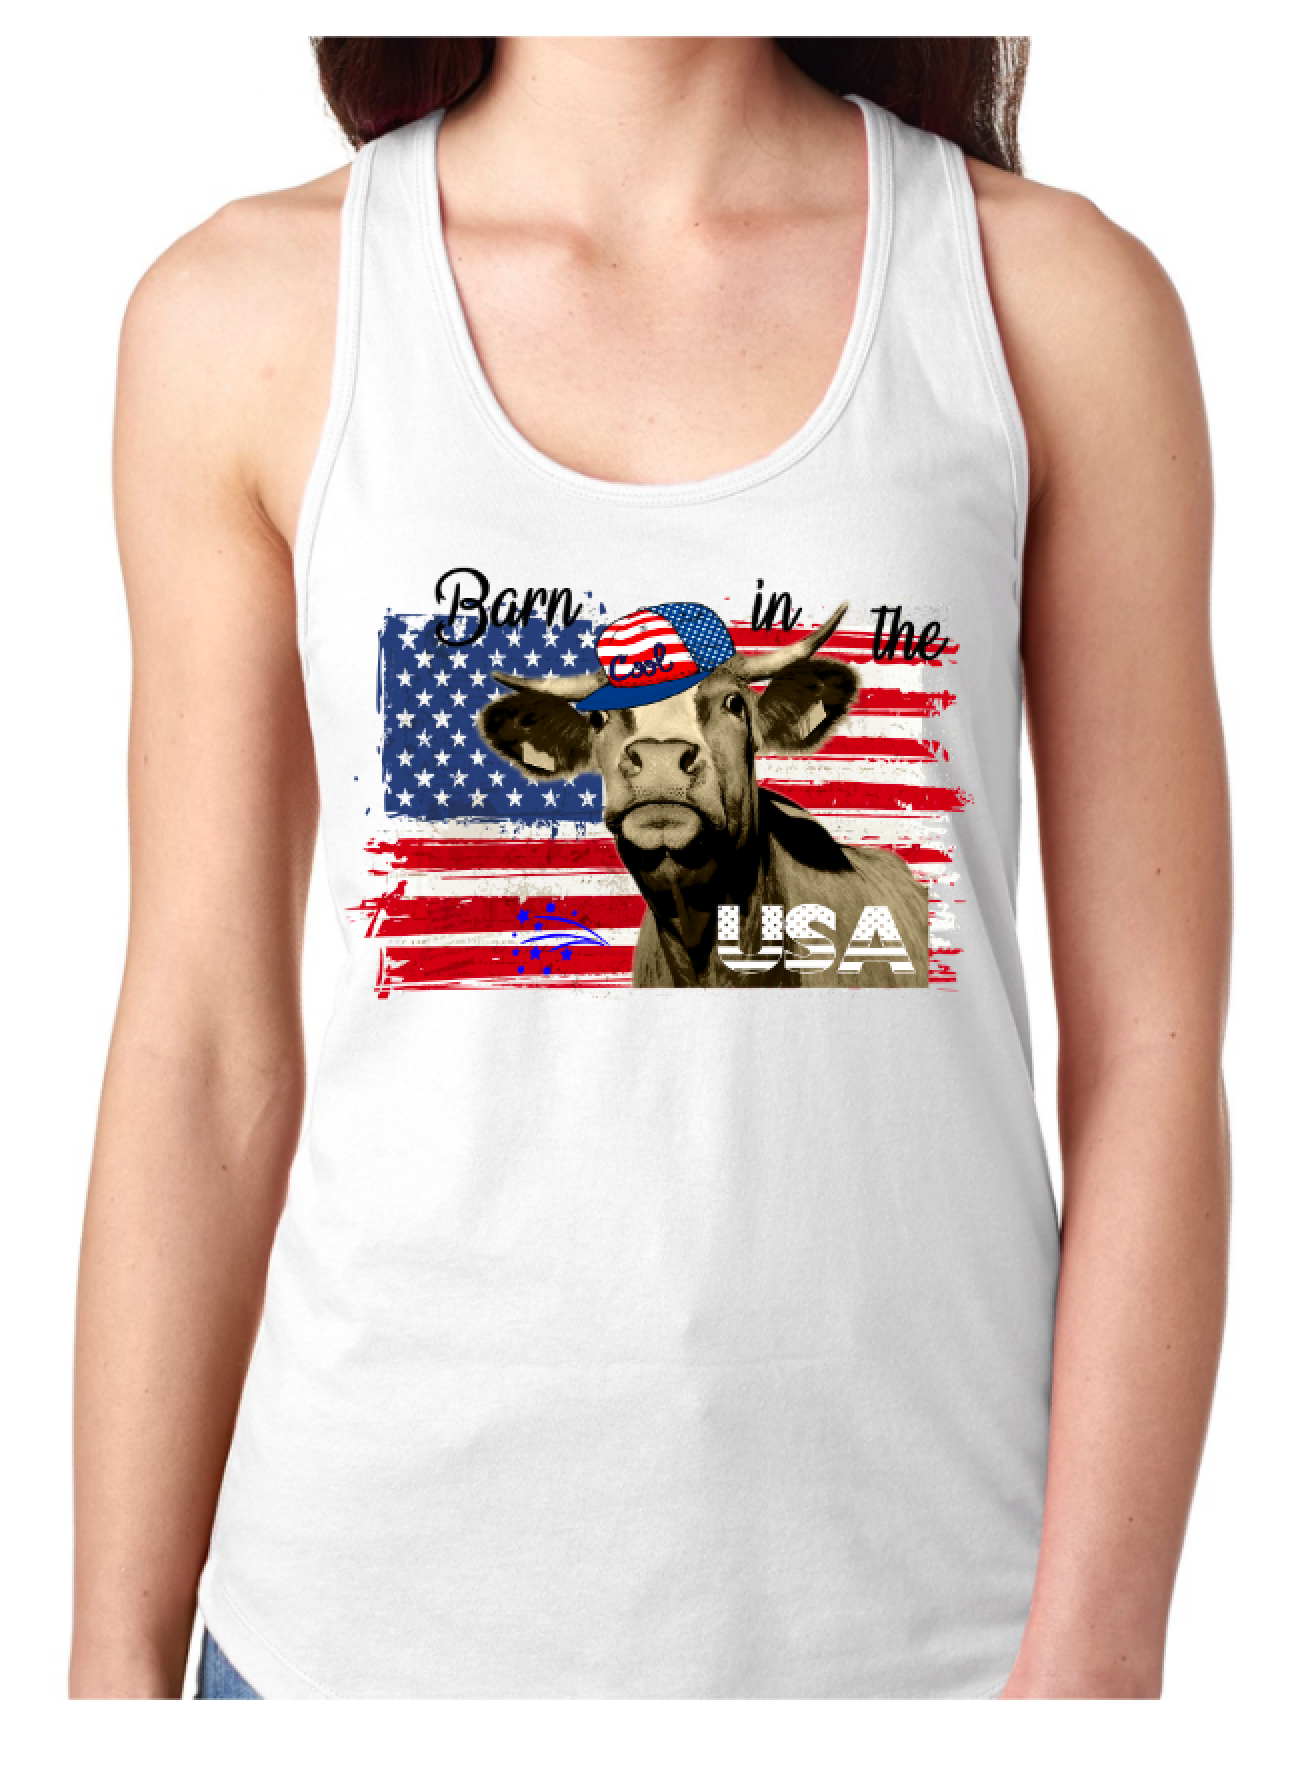 Barn in the USA - Patriotic Tank or T-Shirt